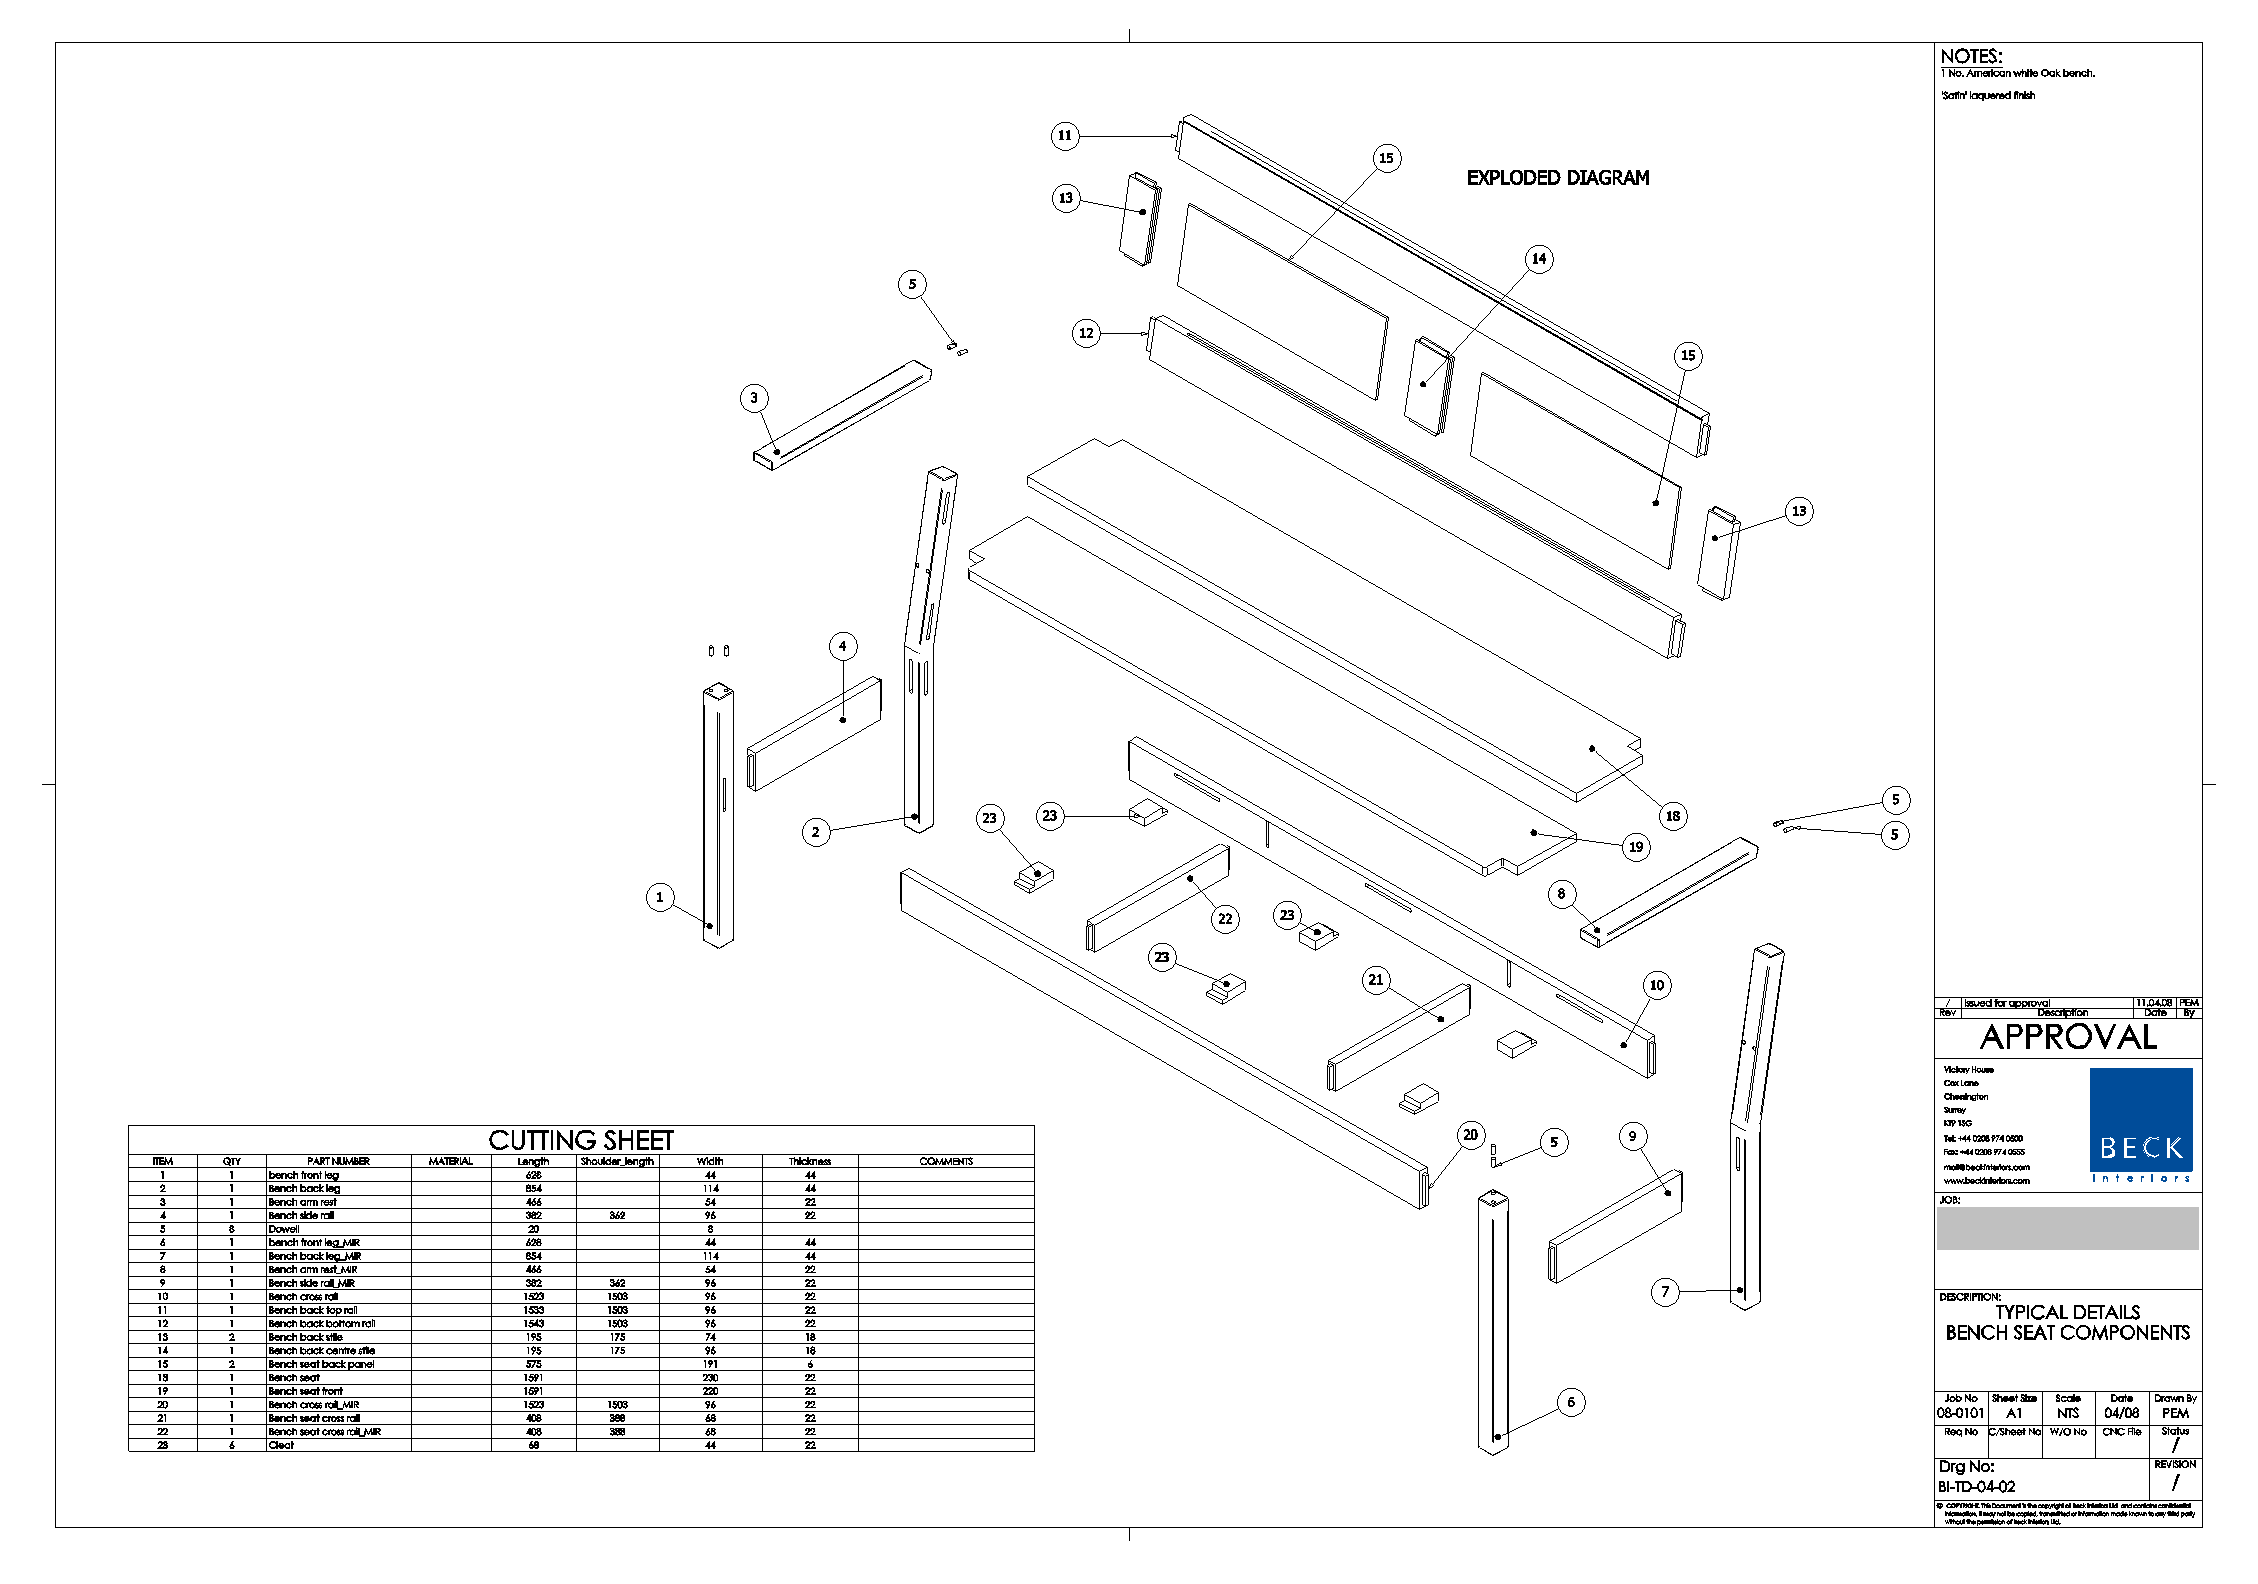 A Setting Out Drawing for a Bench Seat - Exploded diagram and cutting ticket.